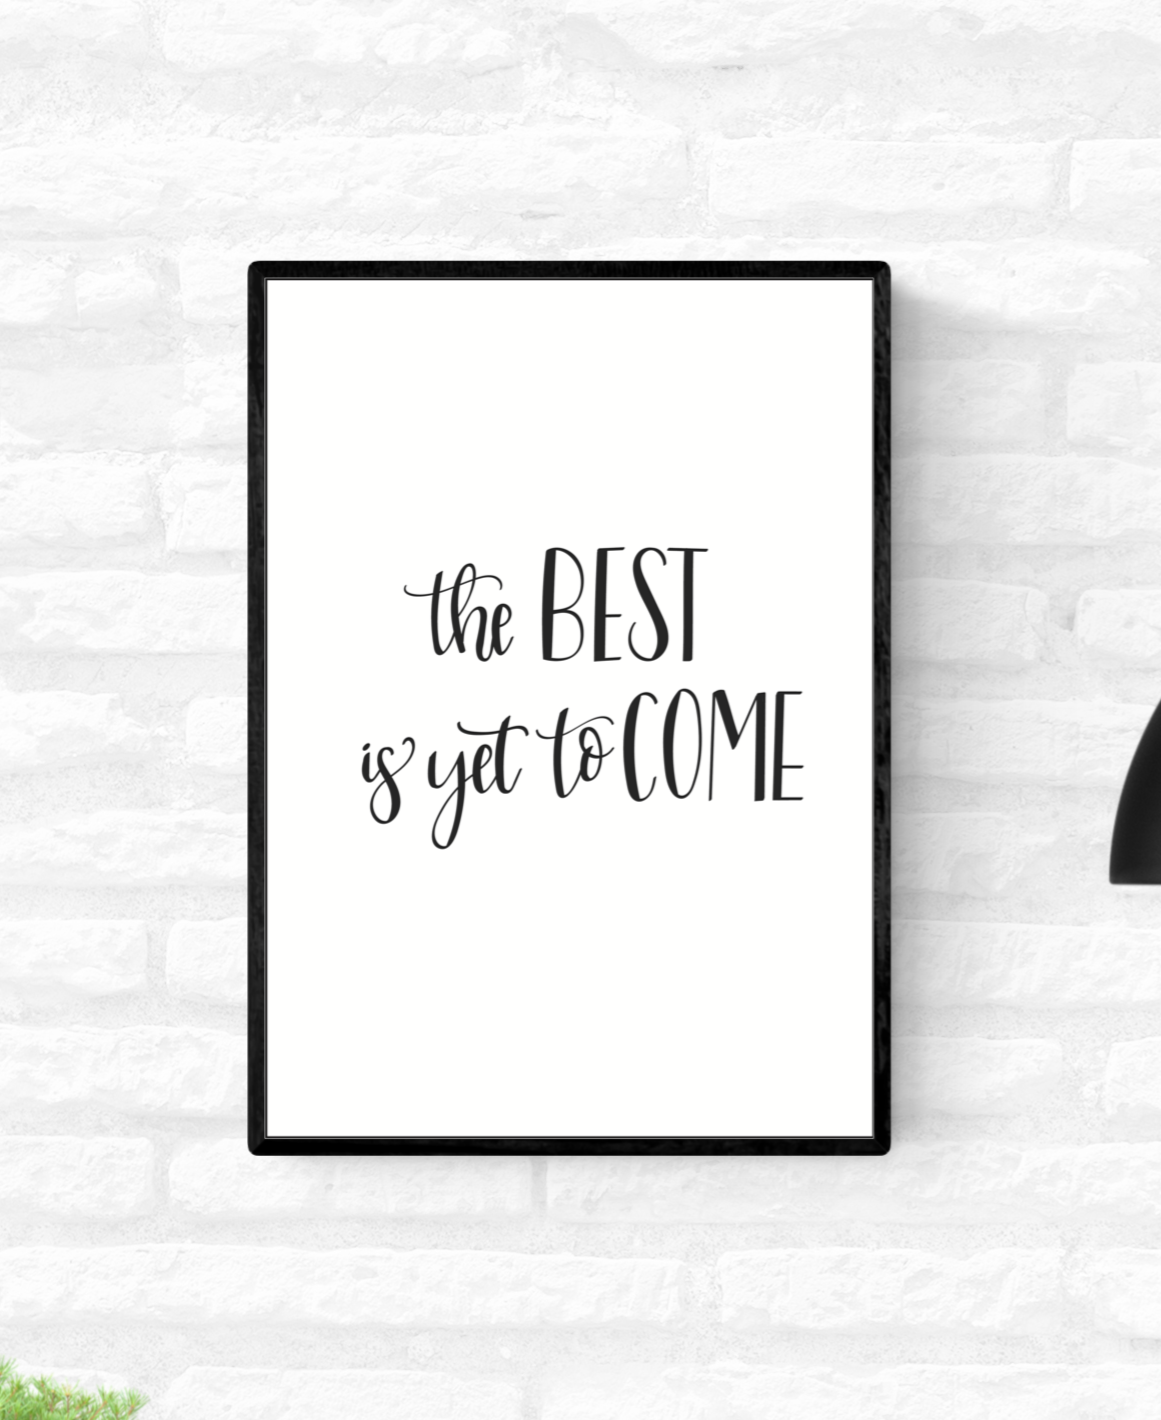 Framed wall quote print with the words “The best is yet to come”, in black and white colour